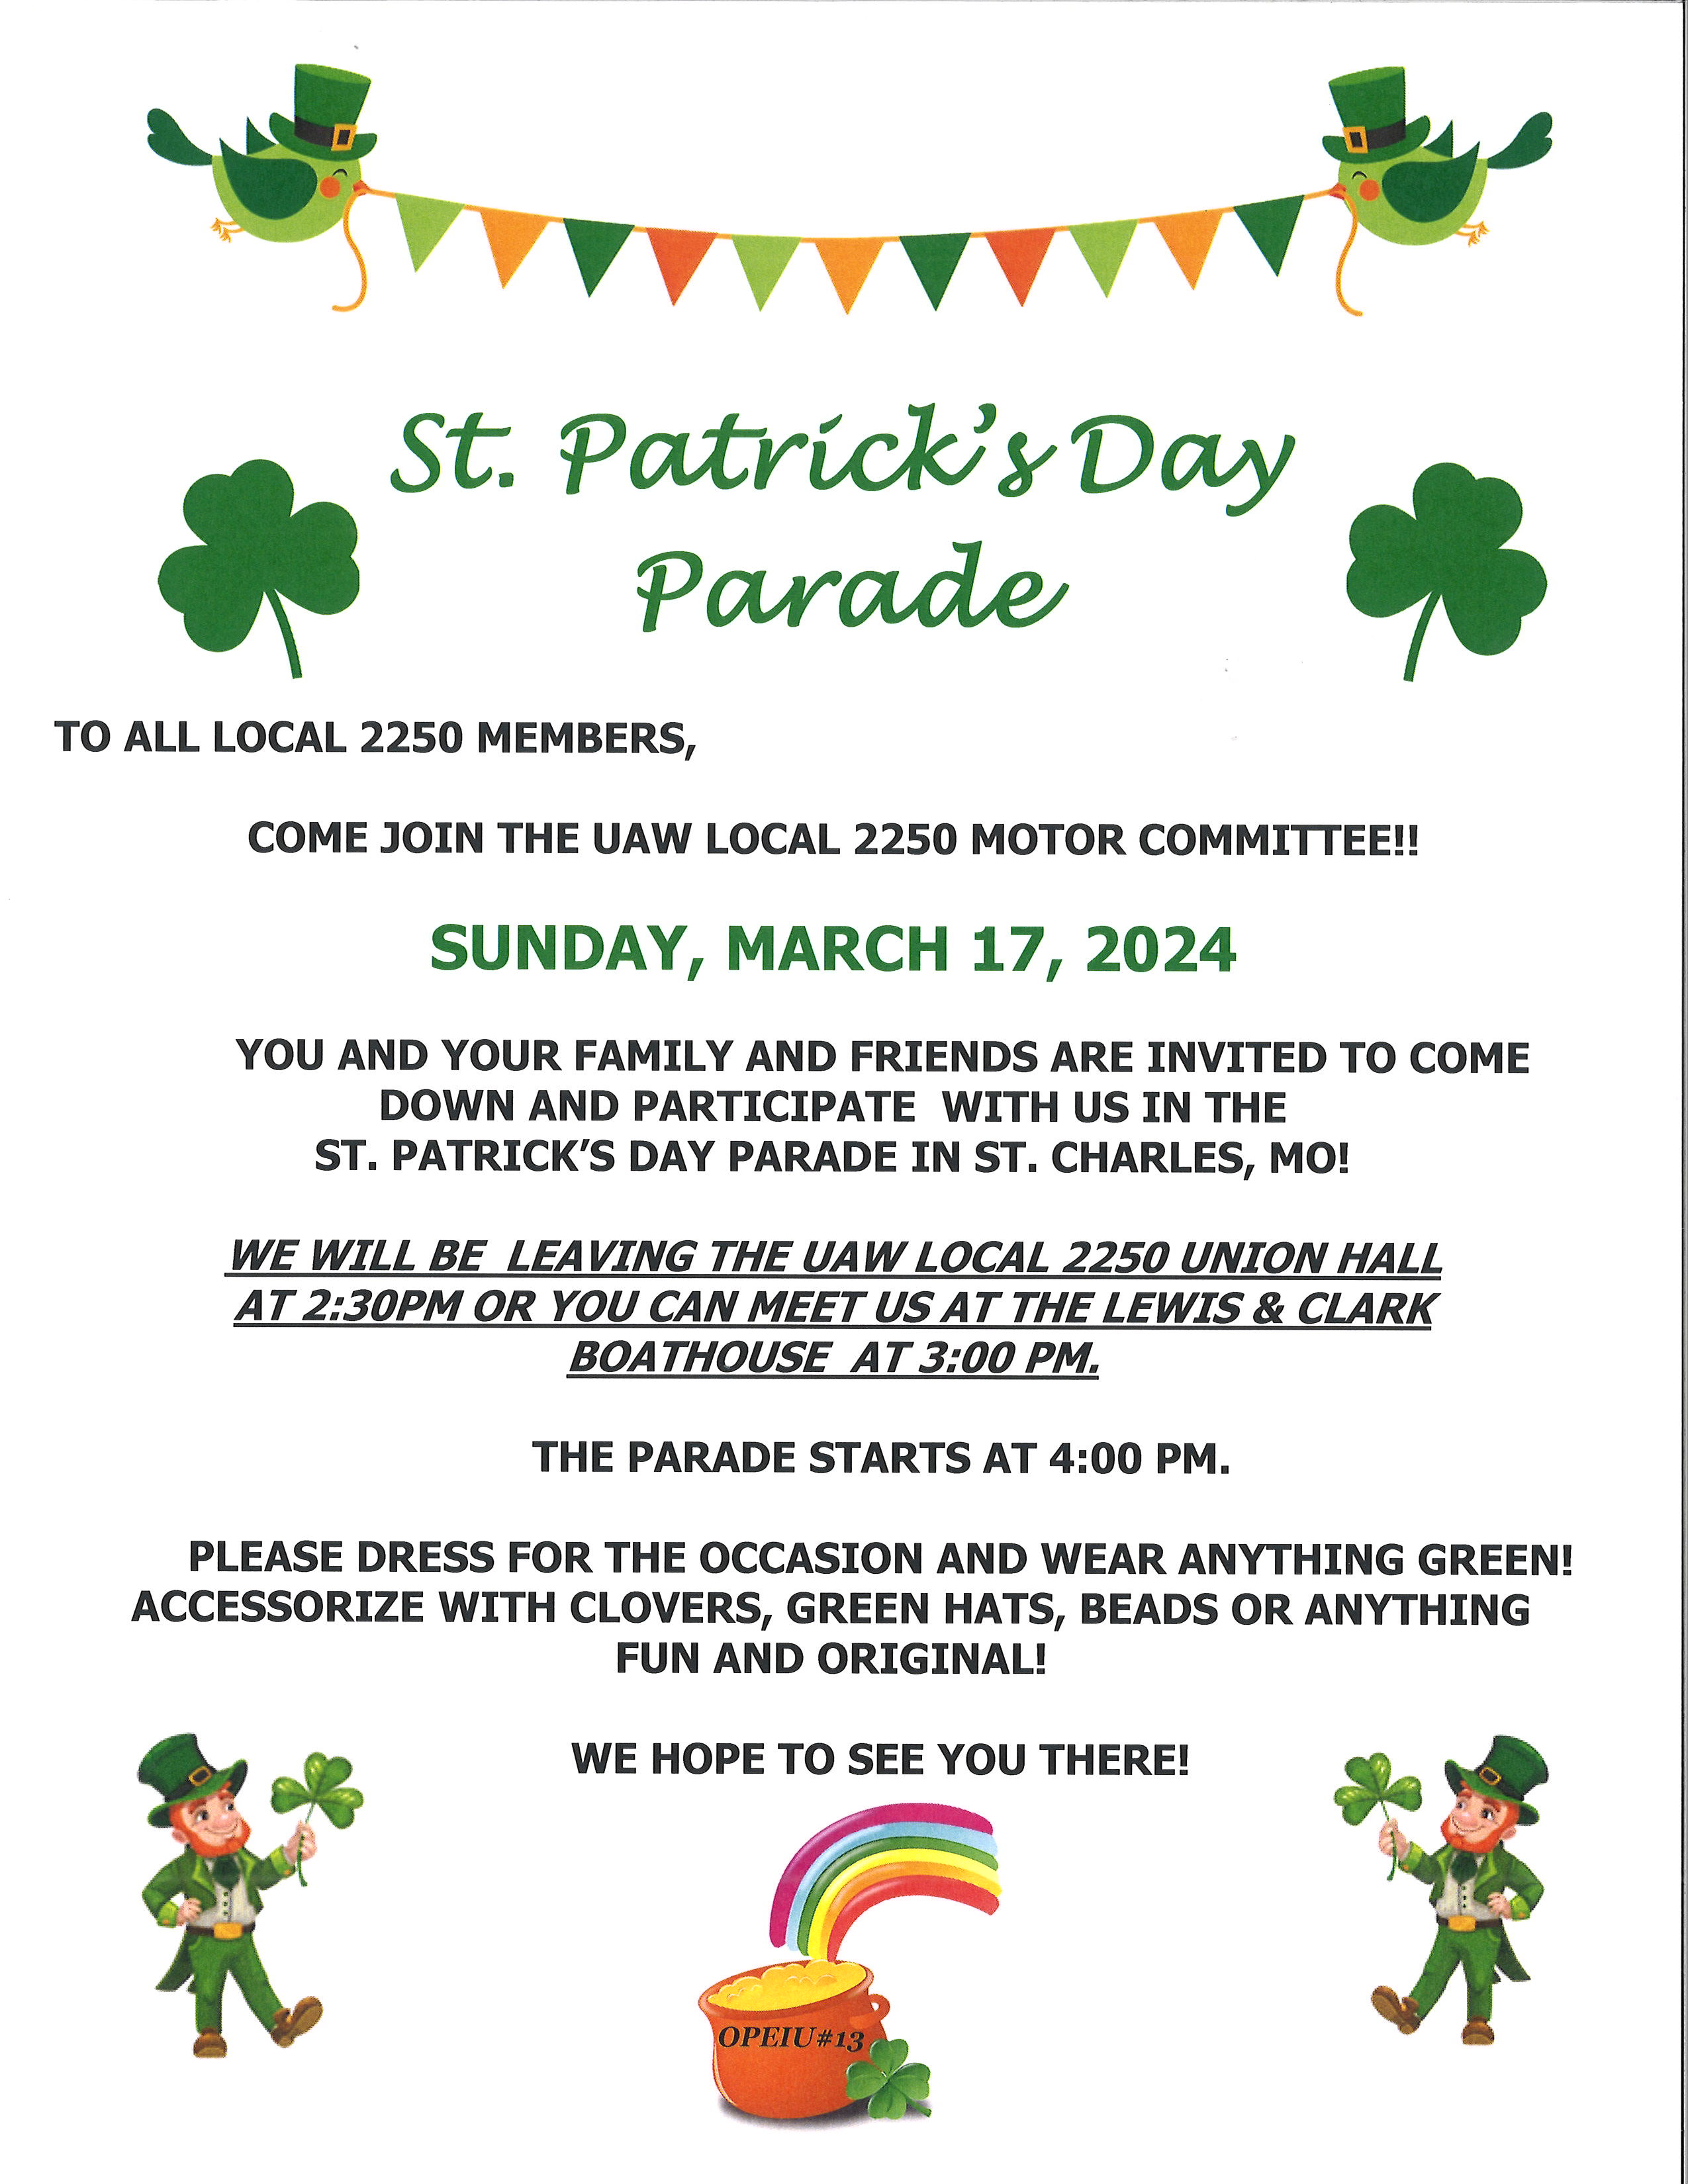 The Motor Committee Invites You Join The Parade!